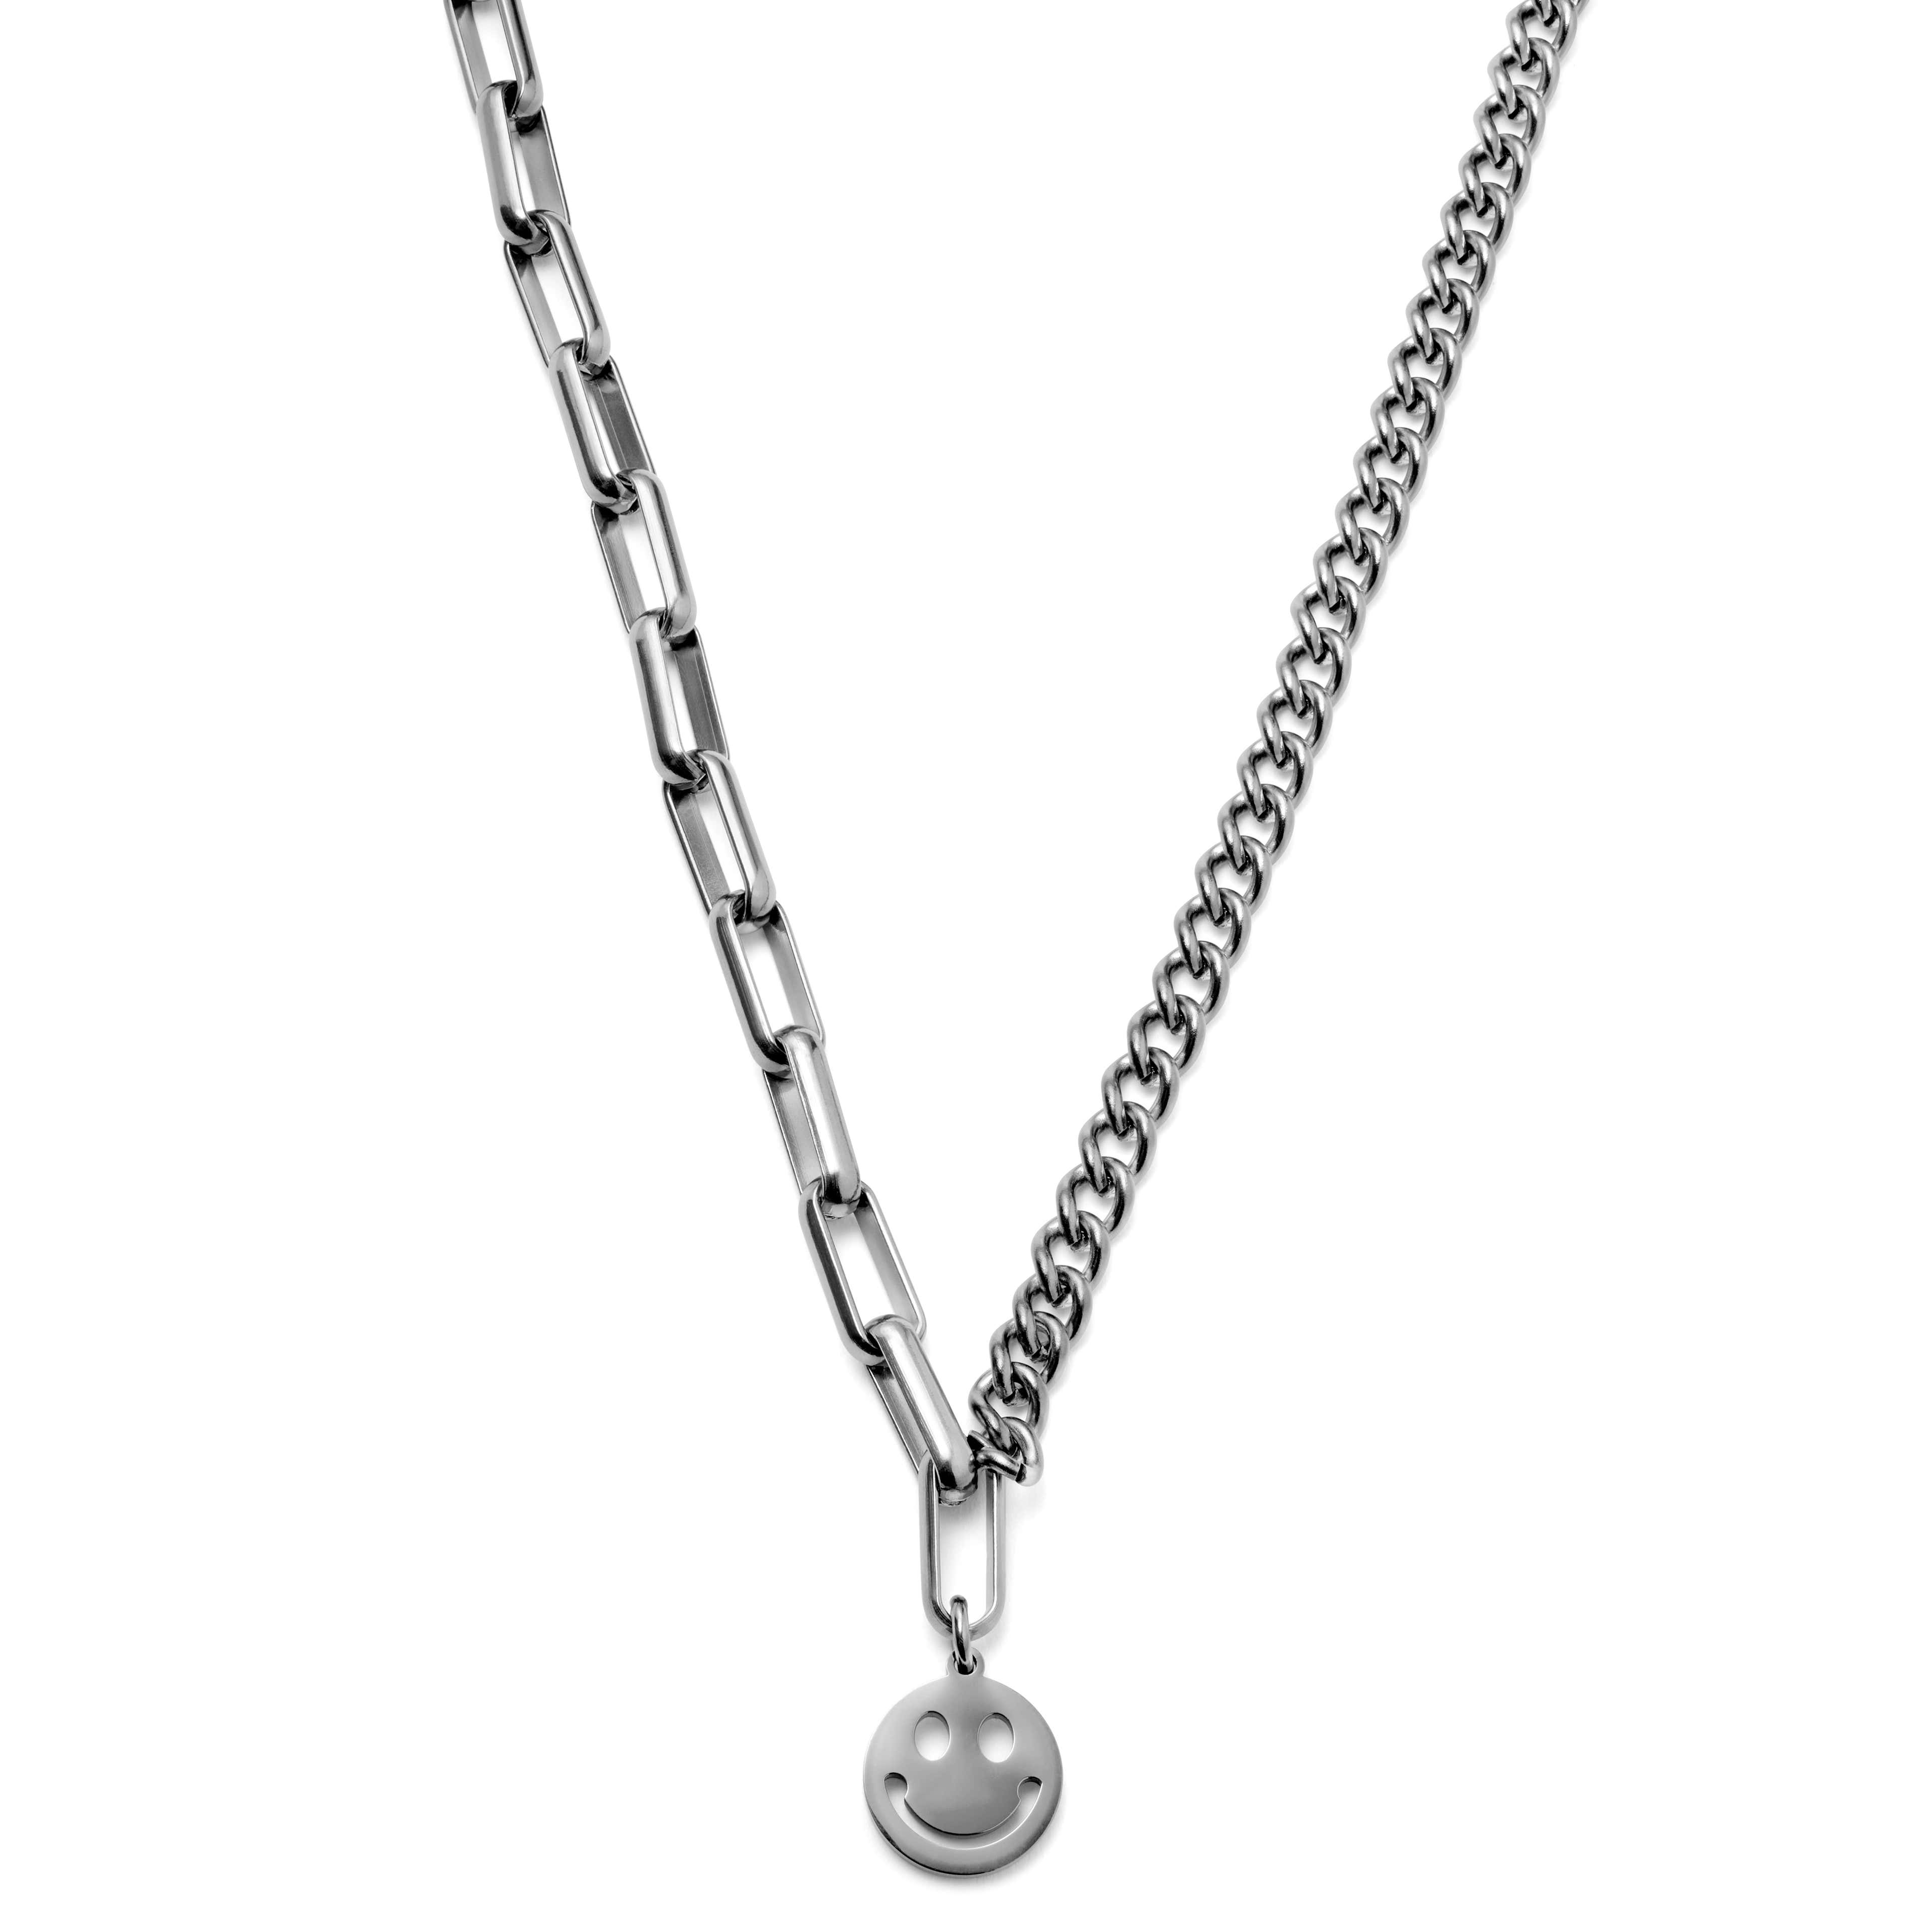 Caleb Amager Silver-Tone Curb & Cable Chain Necklace with Smiley Pendant